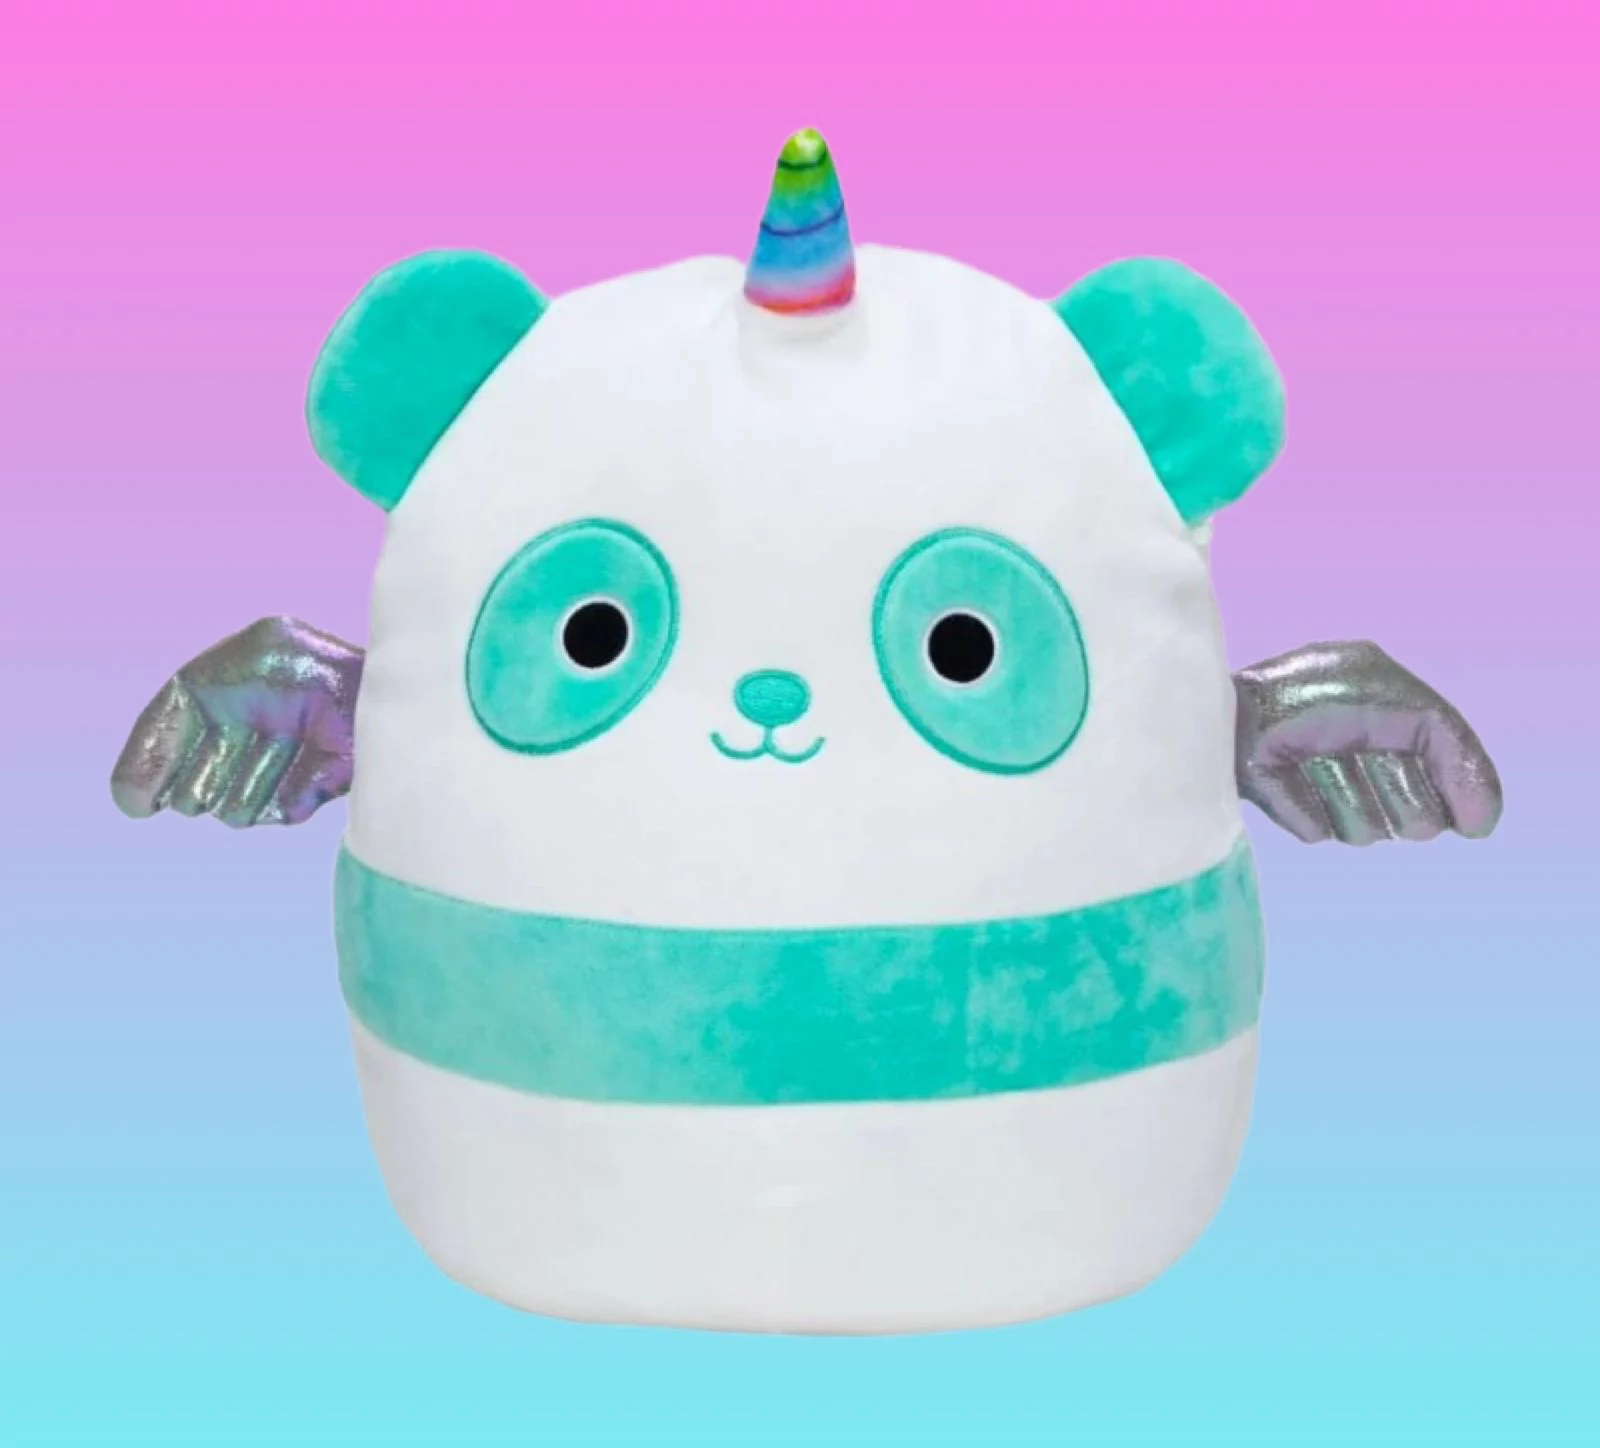 Panda Squishmallows in large size.jfif